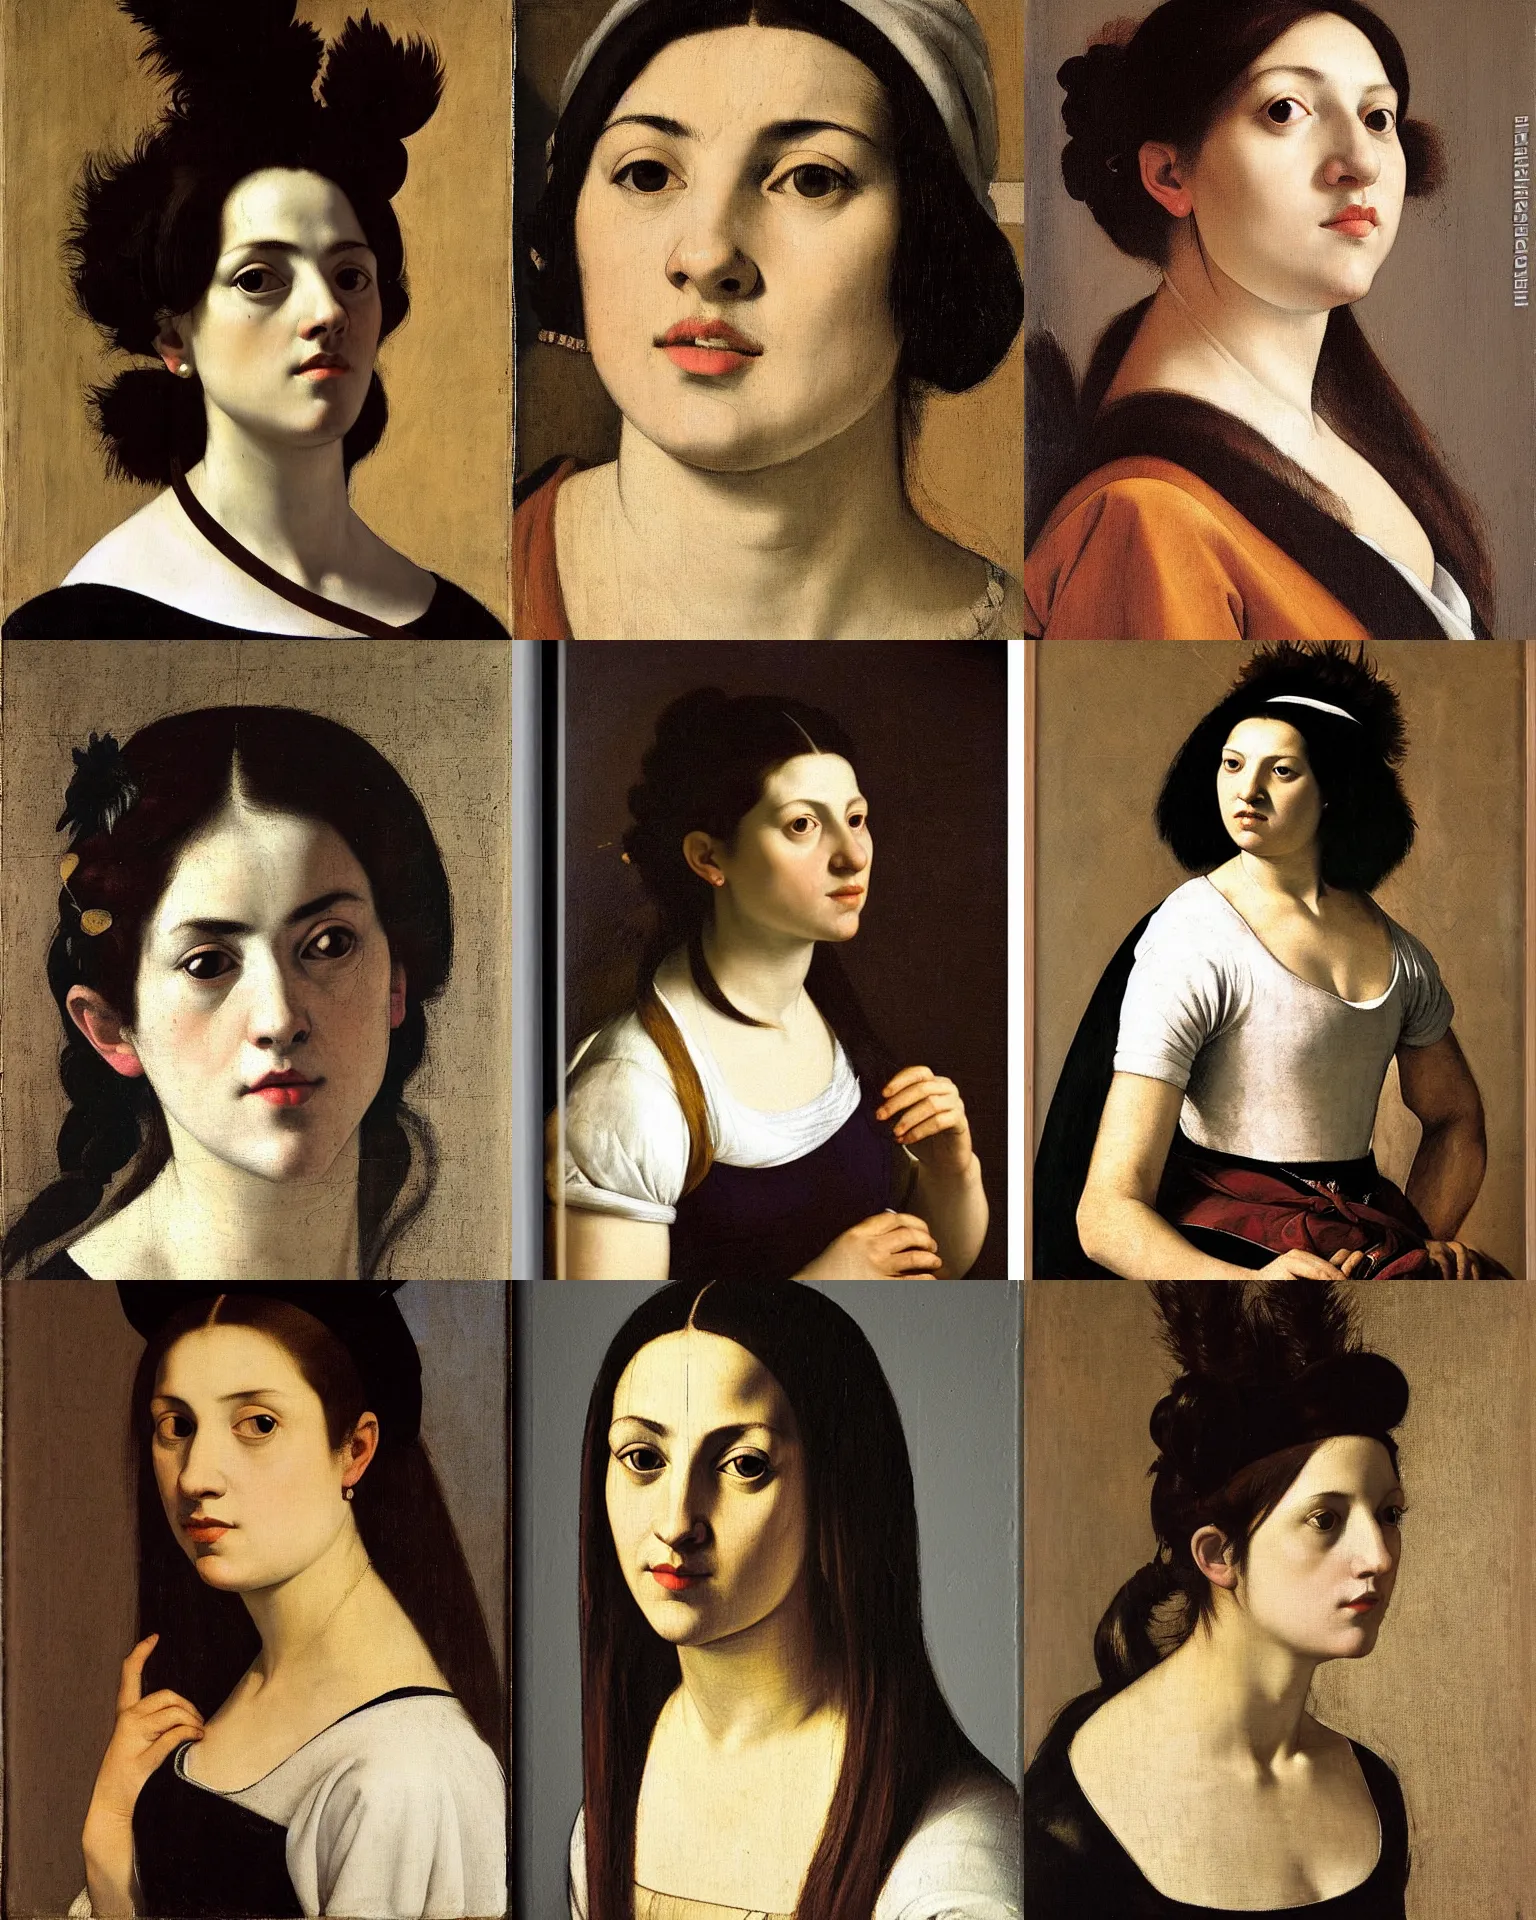 Prompt: a portrait of a woman by artemisia gentileschi. she has long straight dark brown hair, parted in the middle. she has large dark brown eyes, a small refined nose, and thin lips. she is wearing a t - shirt with the supreme brand logo lettering on it, a sleeveless white blouse, a pair of dark brown capris, and black loafers.